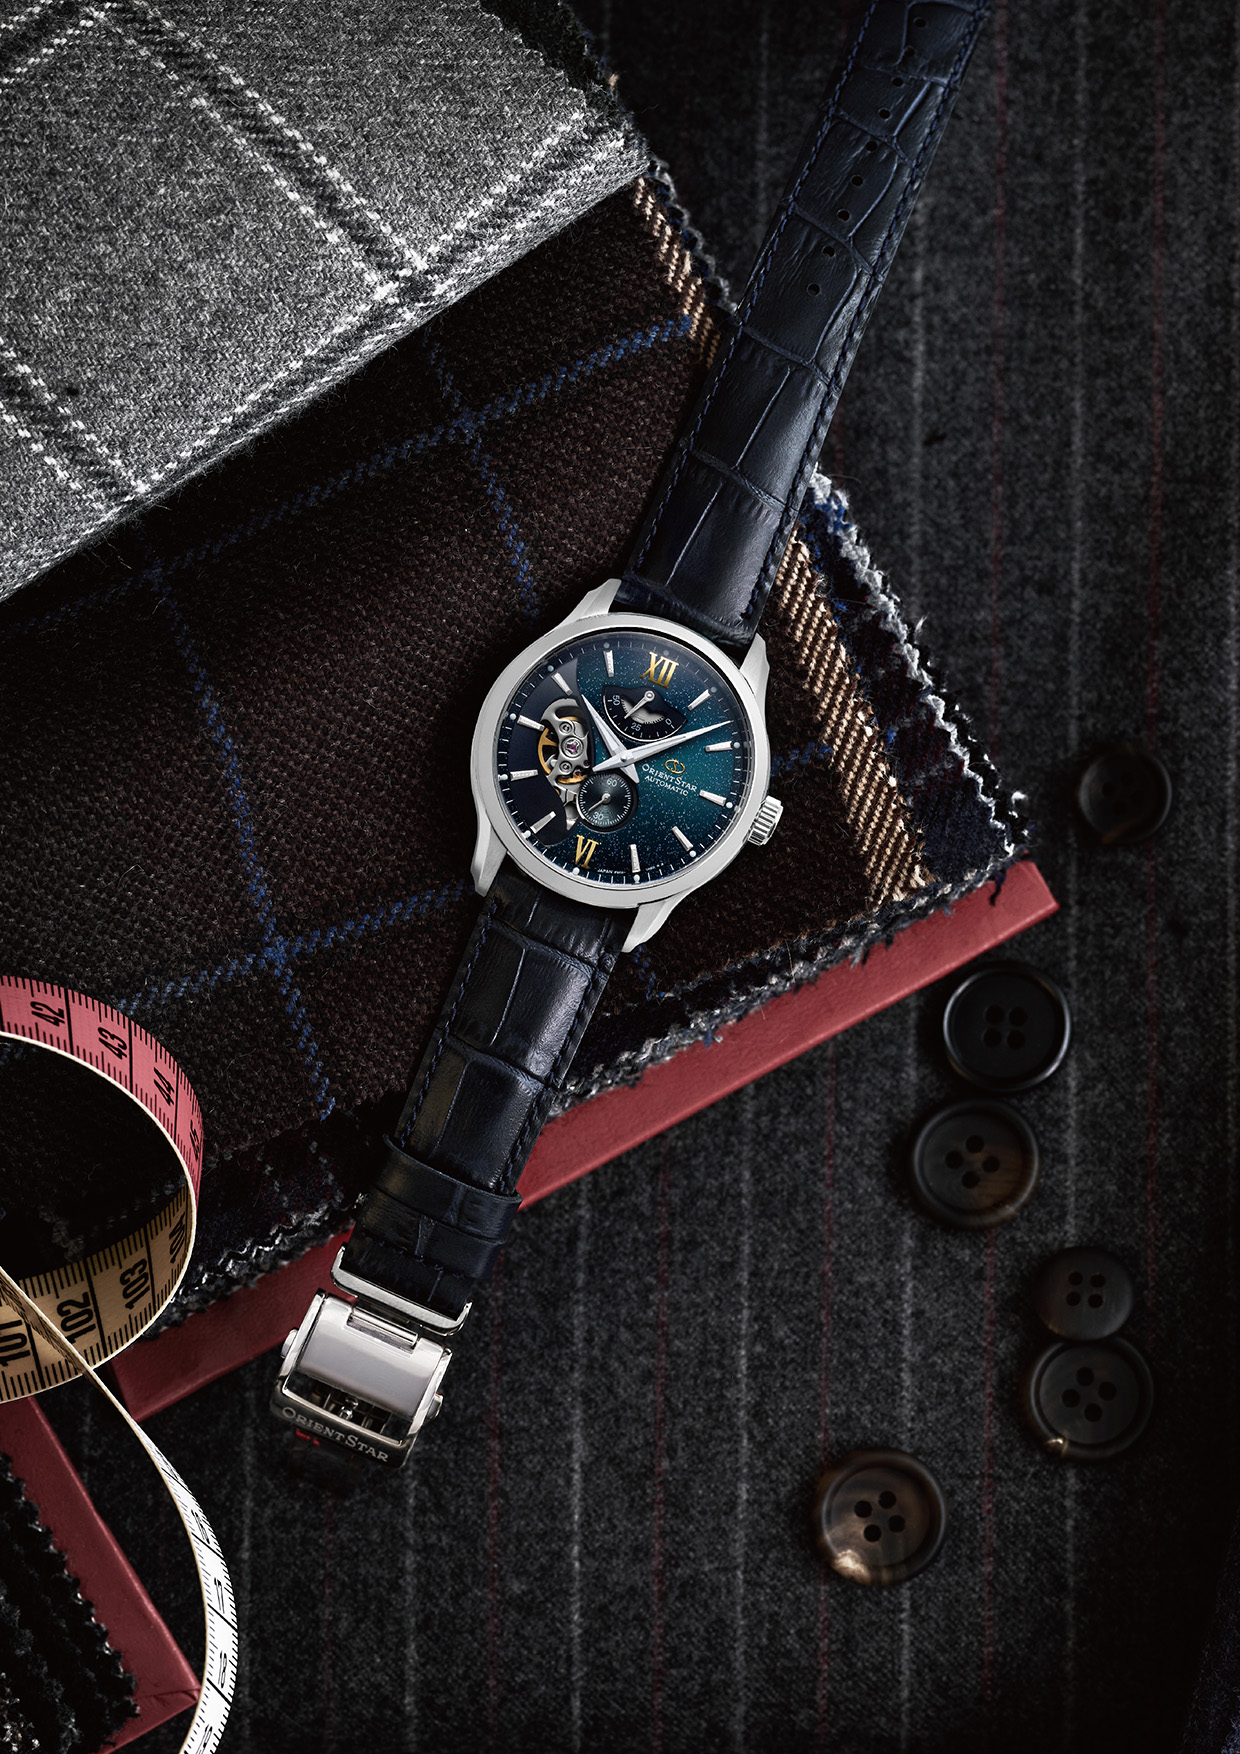 ORIENT STAR launches new Layered Skeleton watch with an imaginative textile patterned dial inspired by business fashion